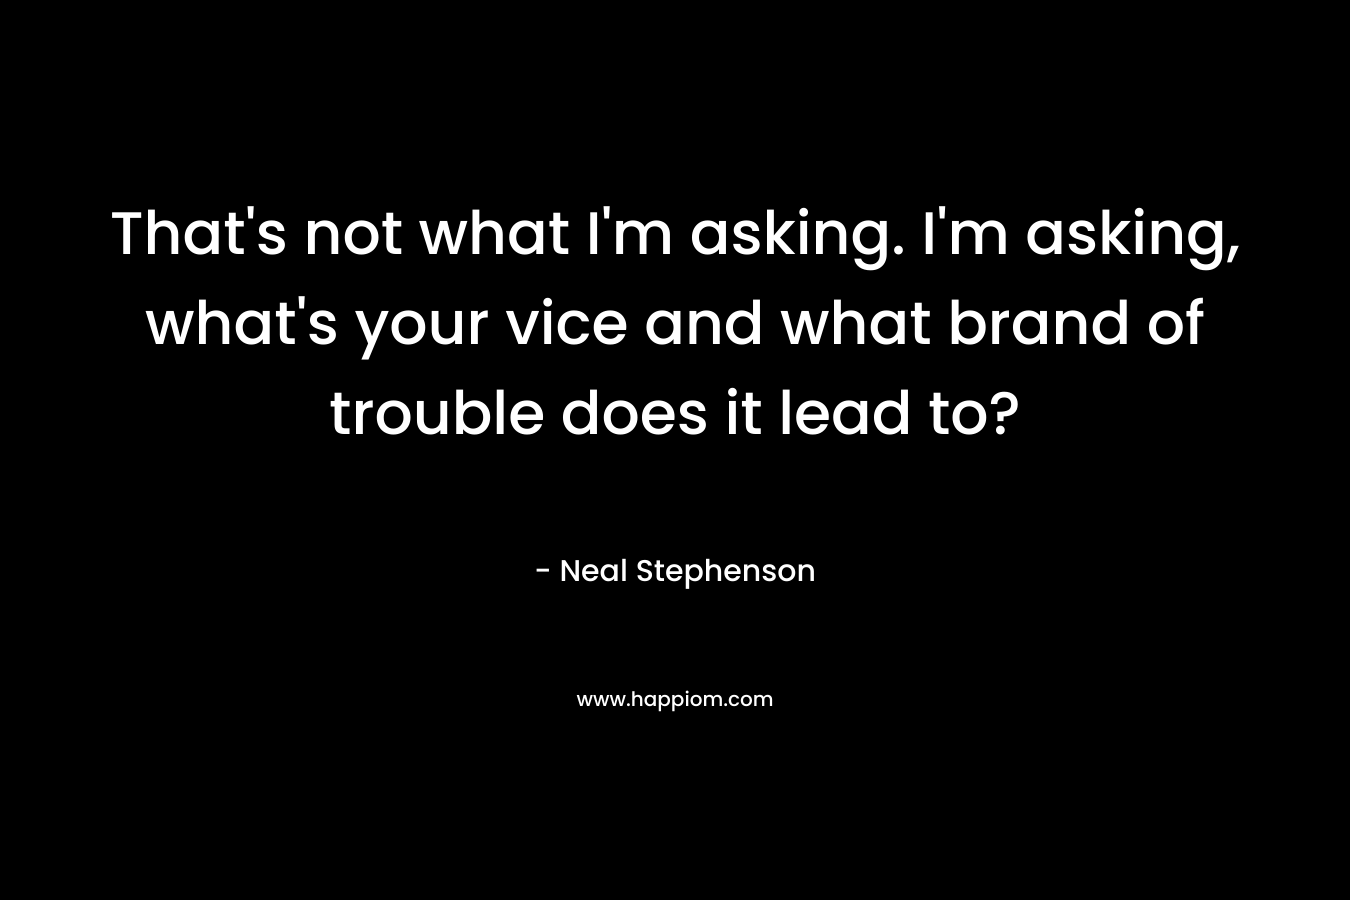 That’s not what I’m asking. I’m asking, what’s your vice and what brand of trouble does it lead to? – Neal Stephenson